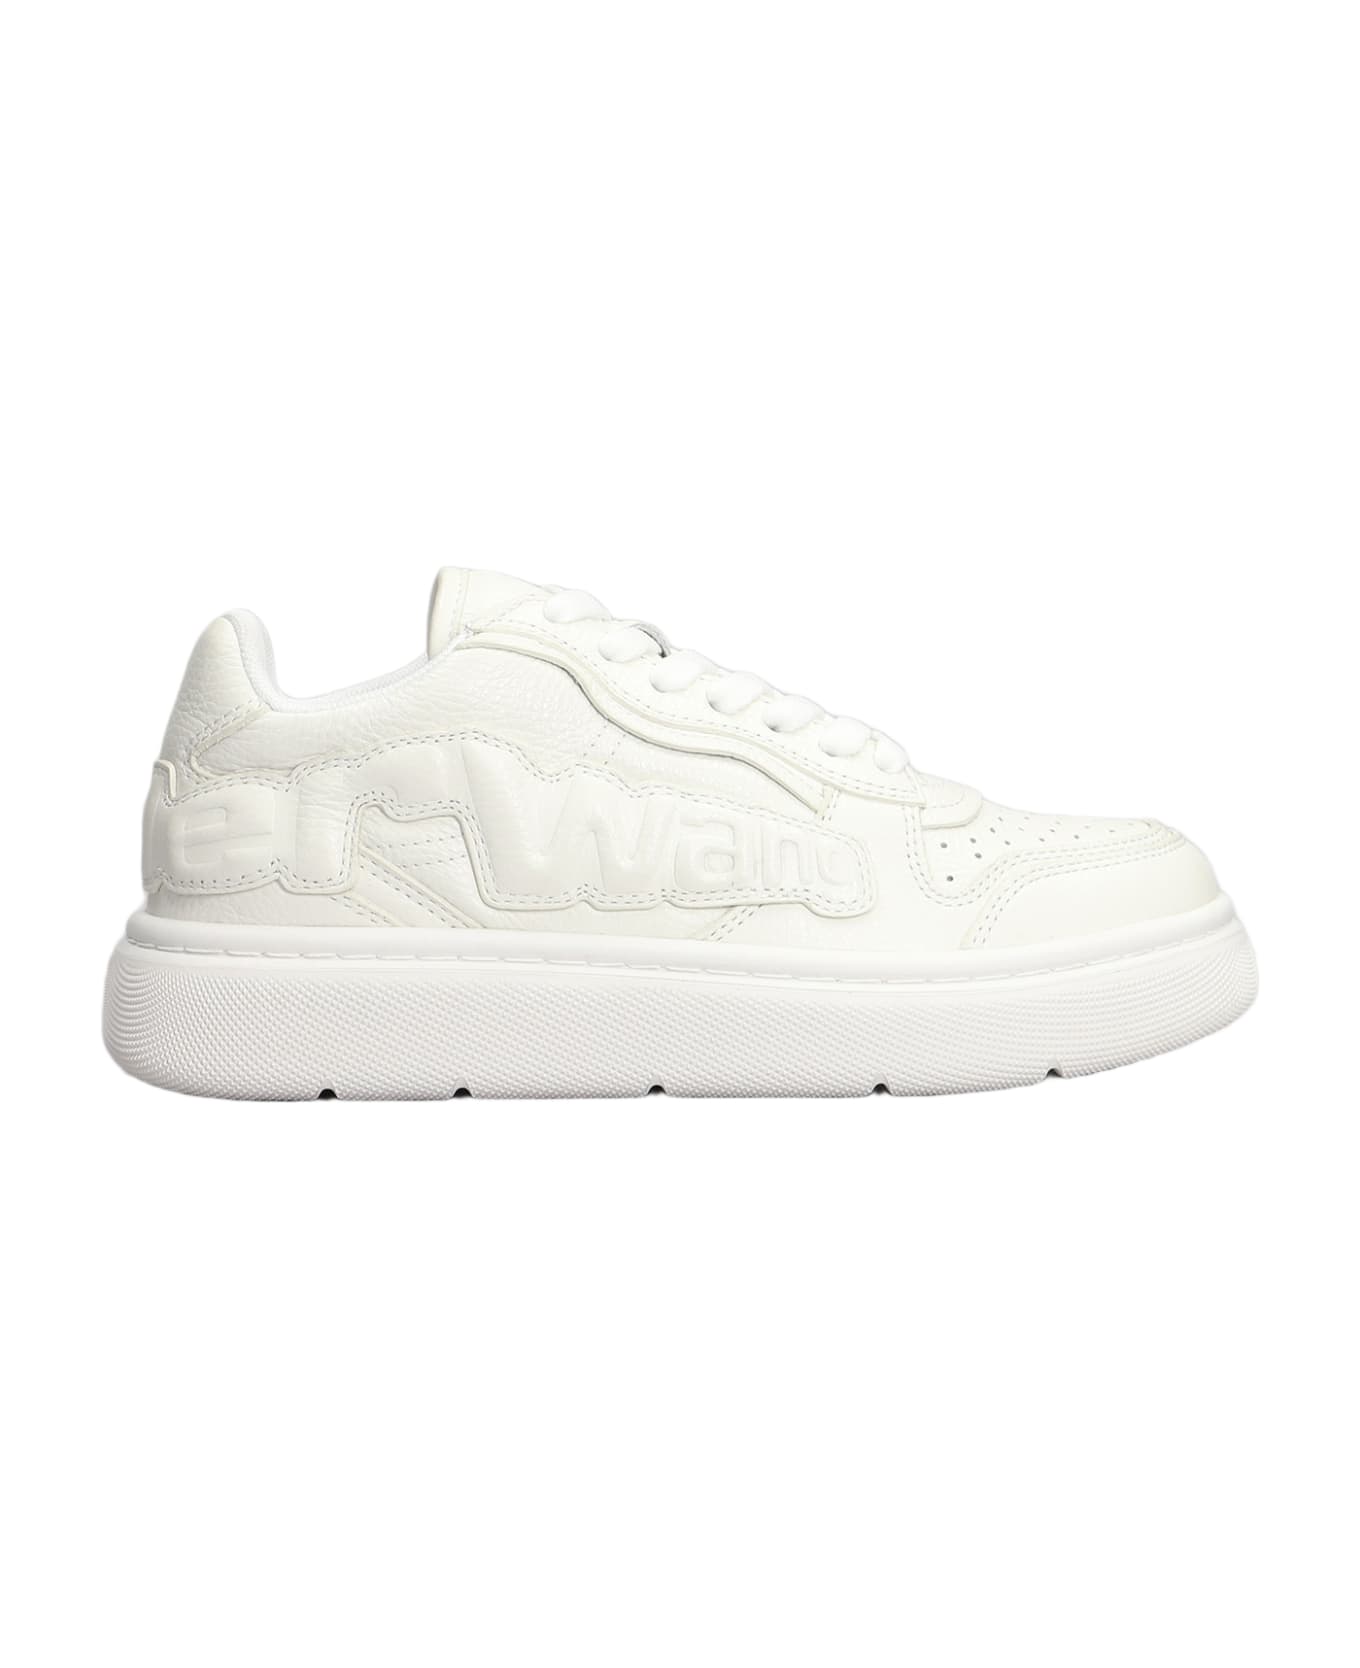 Alexander Wang Sneakers In White Leather - white スニーカー